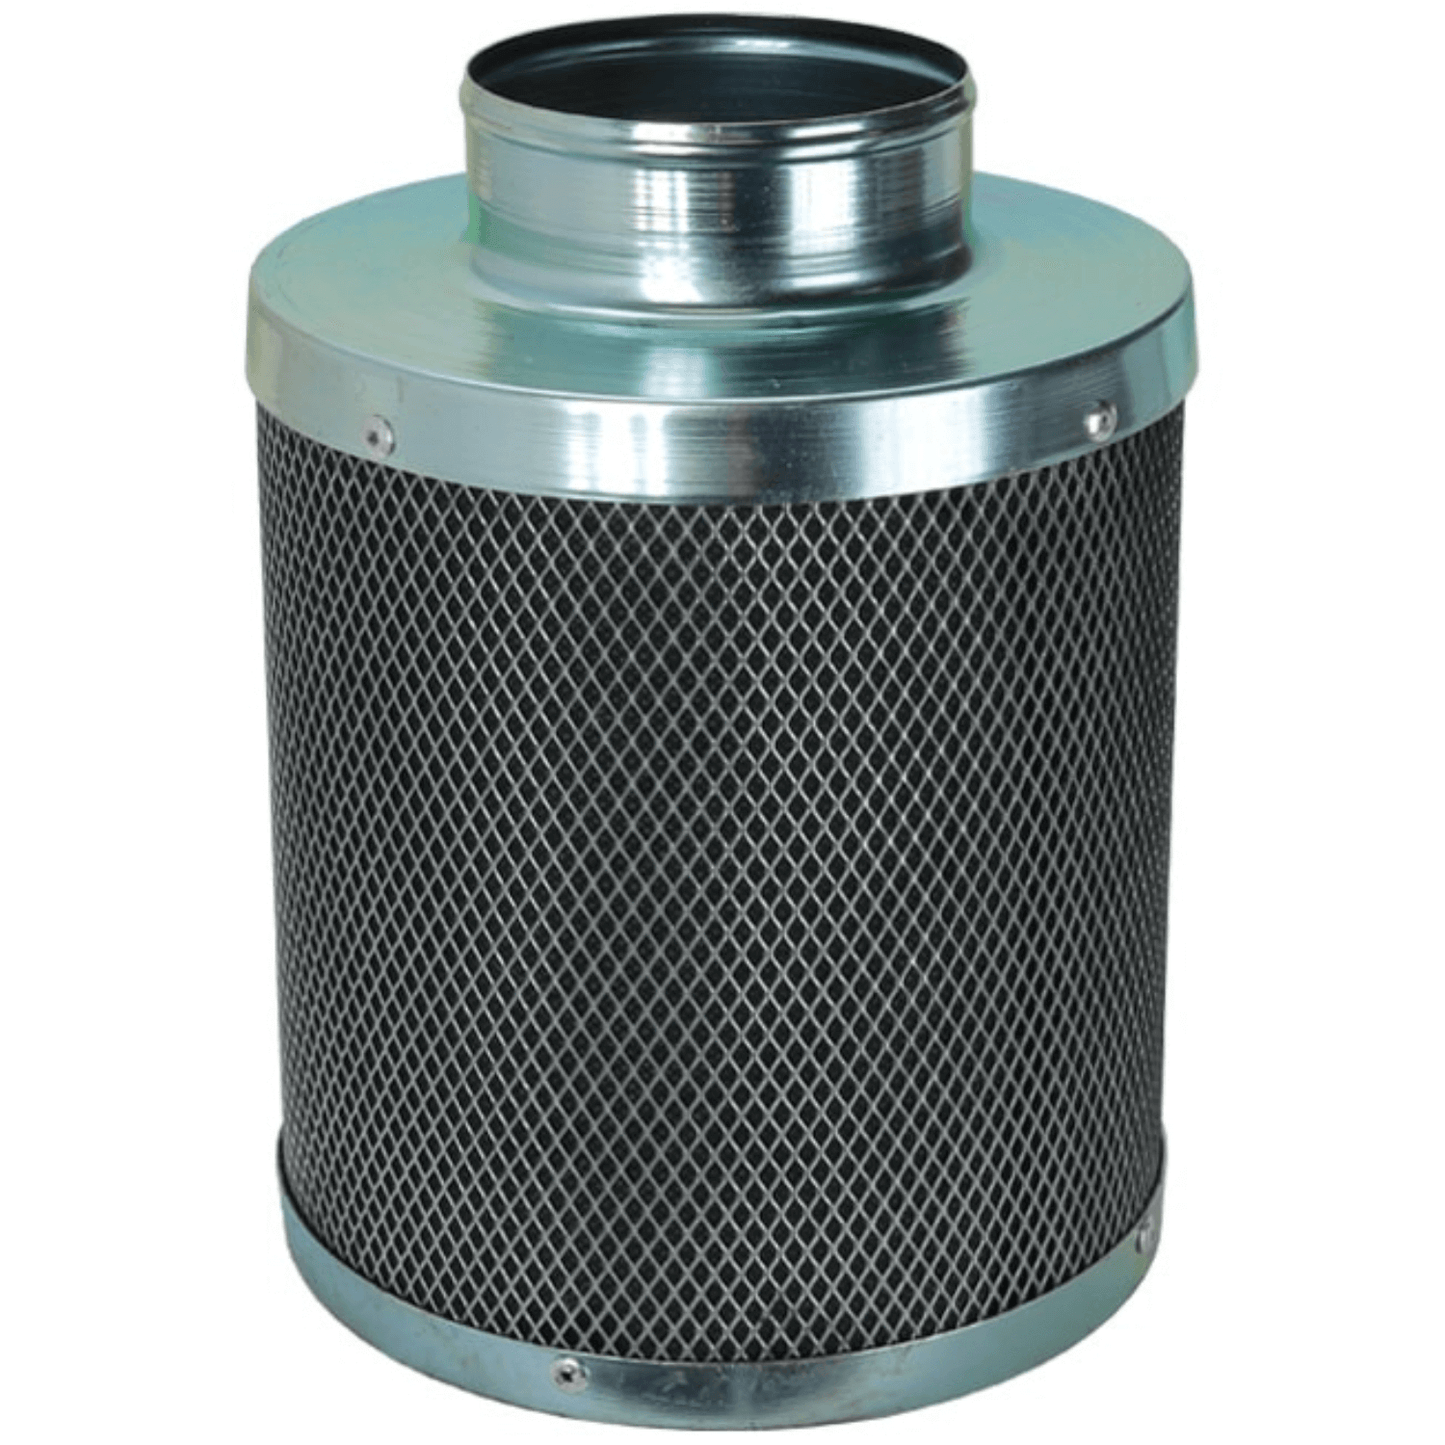 Charco Filters Plus 6" X 24" Activated Carbon Air Filter 971206-1 Climate Control 816731010160